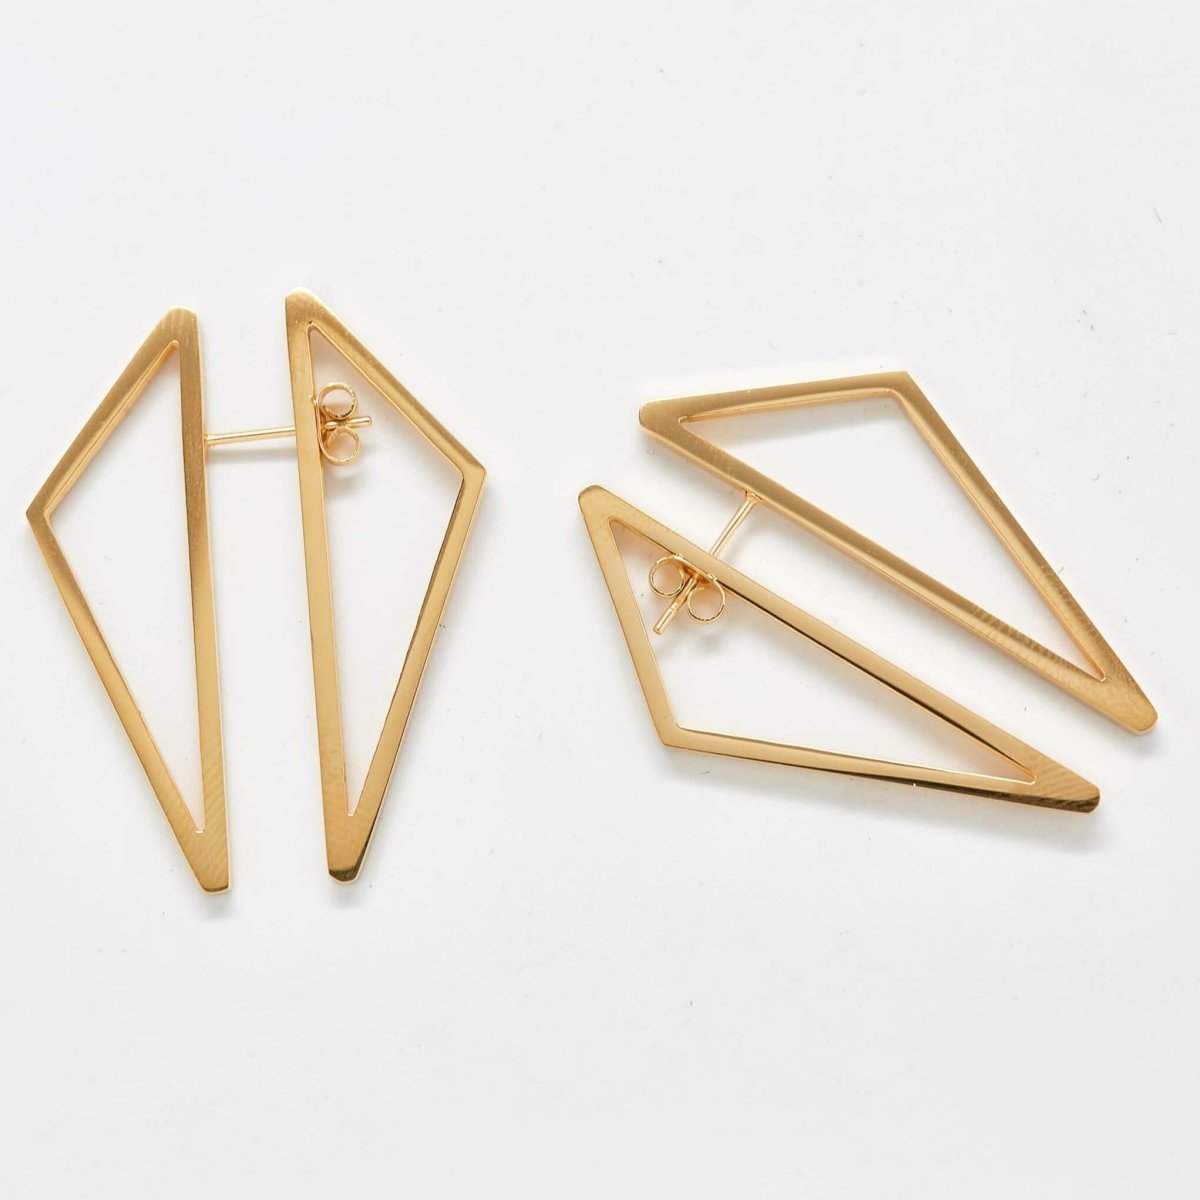 Double-Sided Gold Geometric Triangle Earrings - Admiral Row